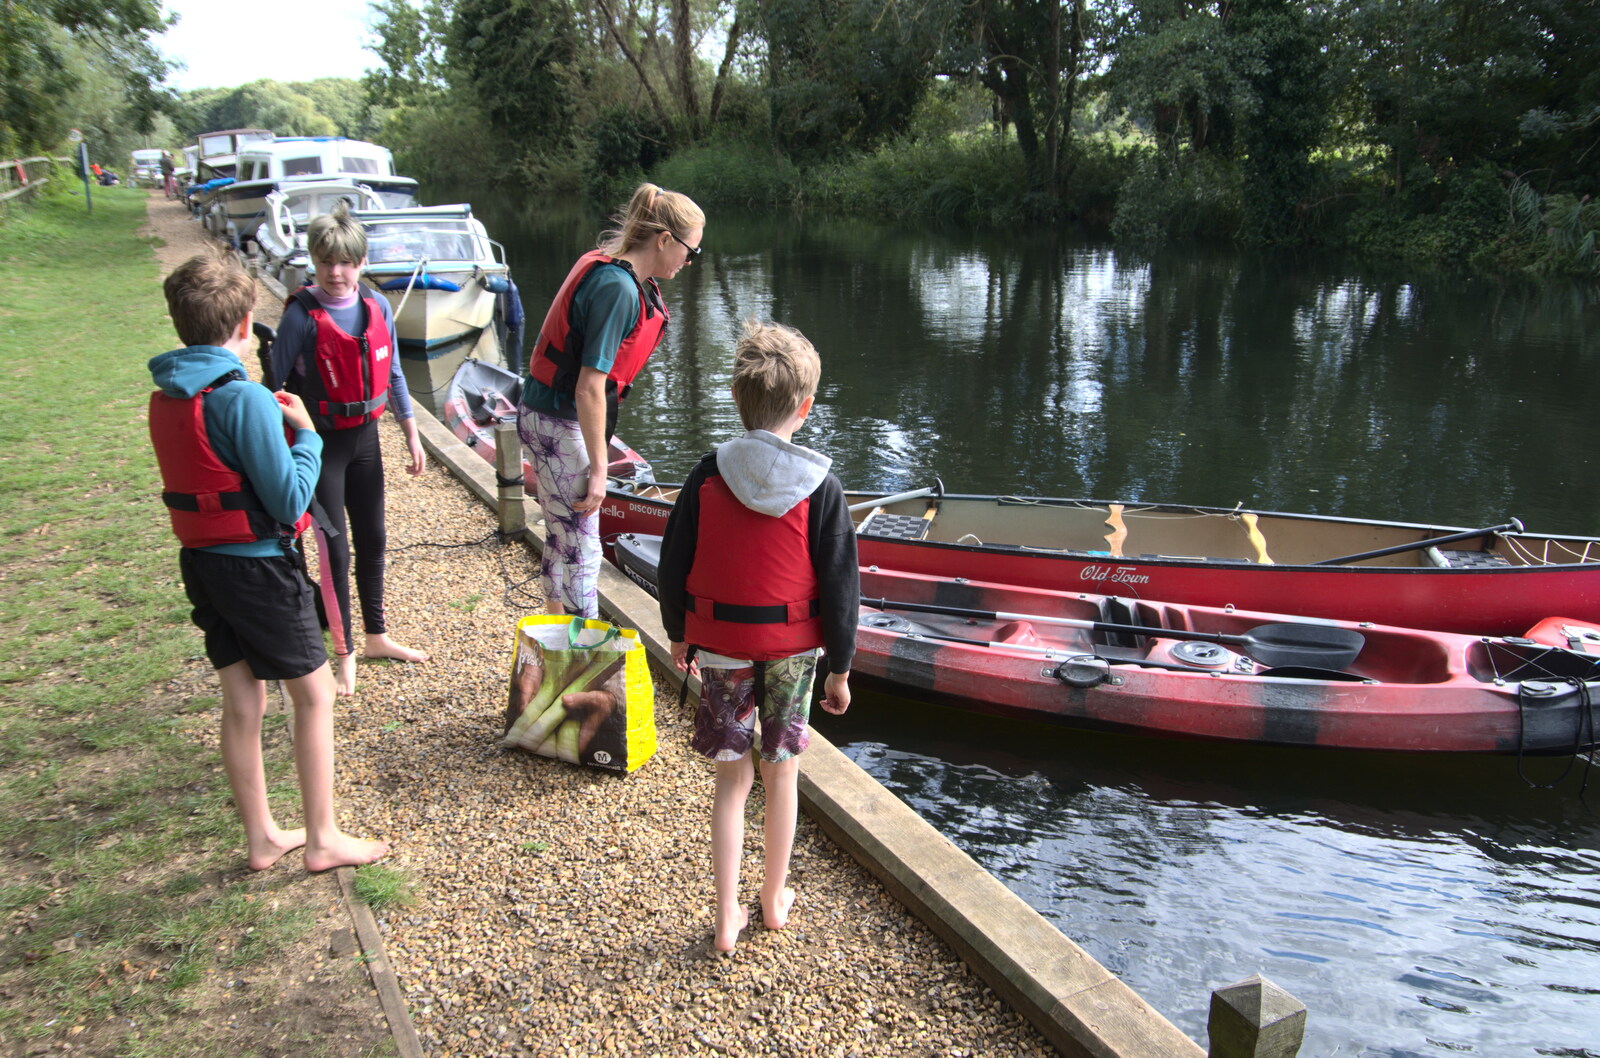 Camping at Three Rivers, Geldeston, Norfolk - 5th September 2020: We prepare to reboard our river craft